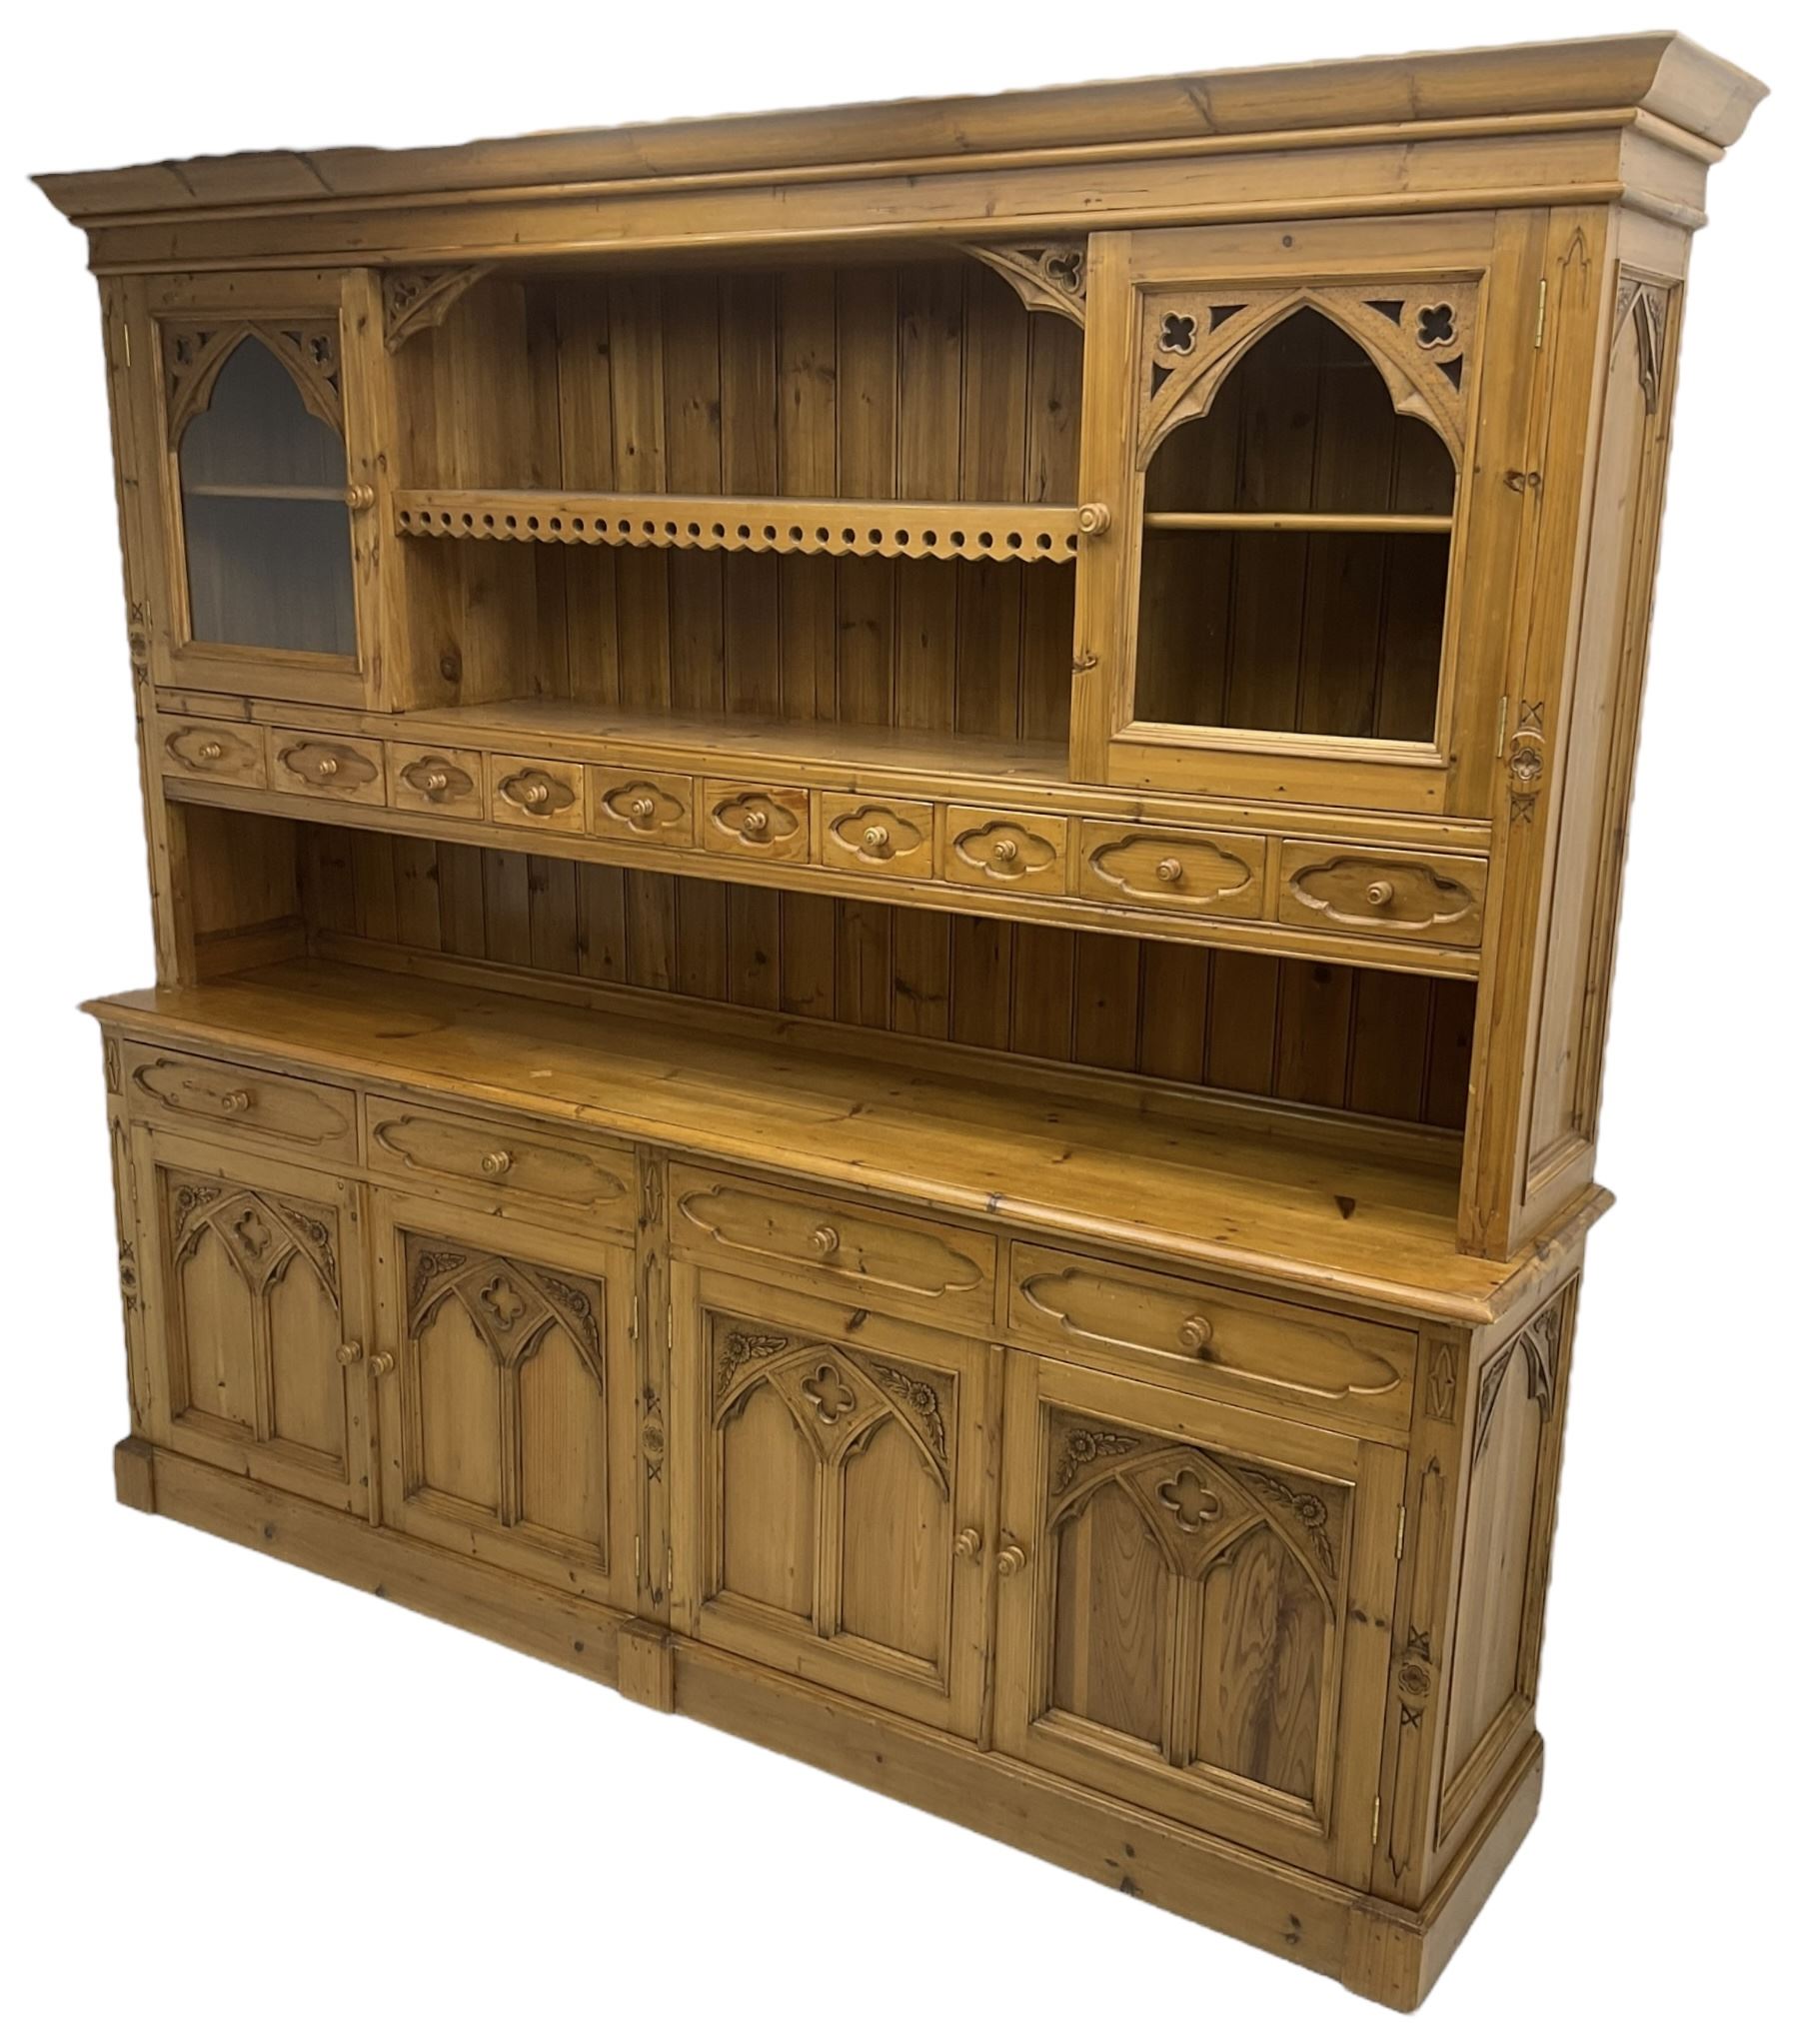 Ecclesiastical Gothic design waxed pine 8’ dresser - Image 2 of 8